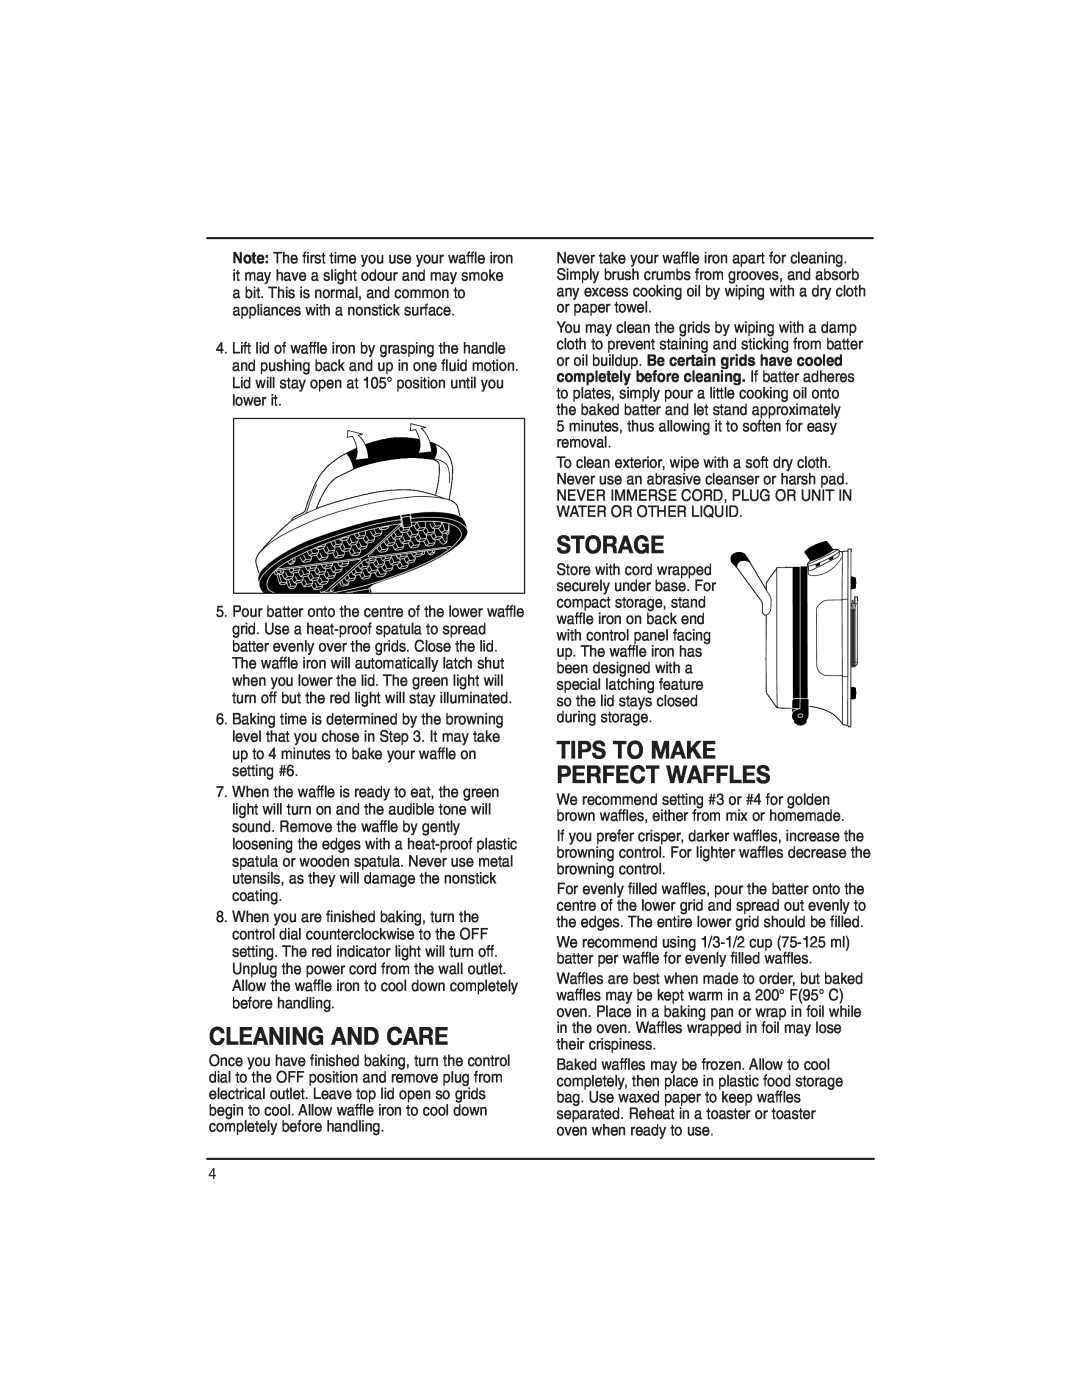 Cuisinart WAF-RC manual Cleaning And Care, Storage, Tips To Make Perfect Waffles 